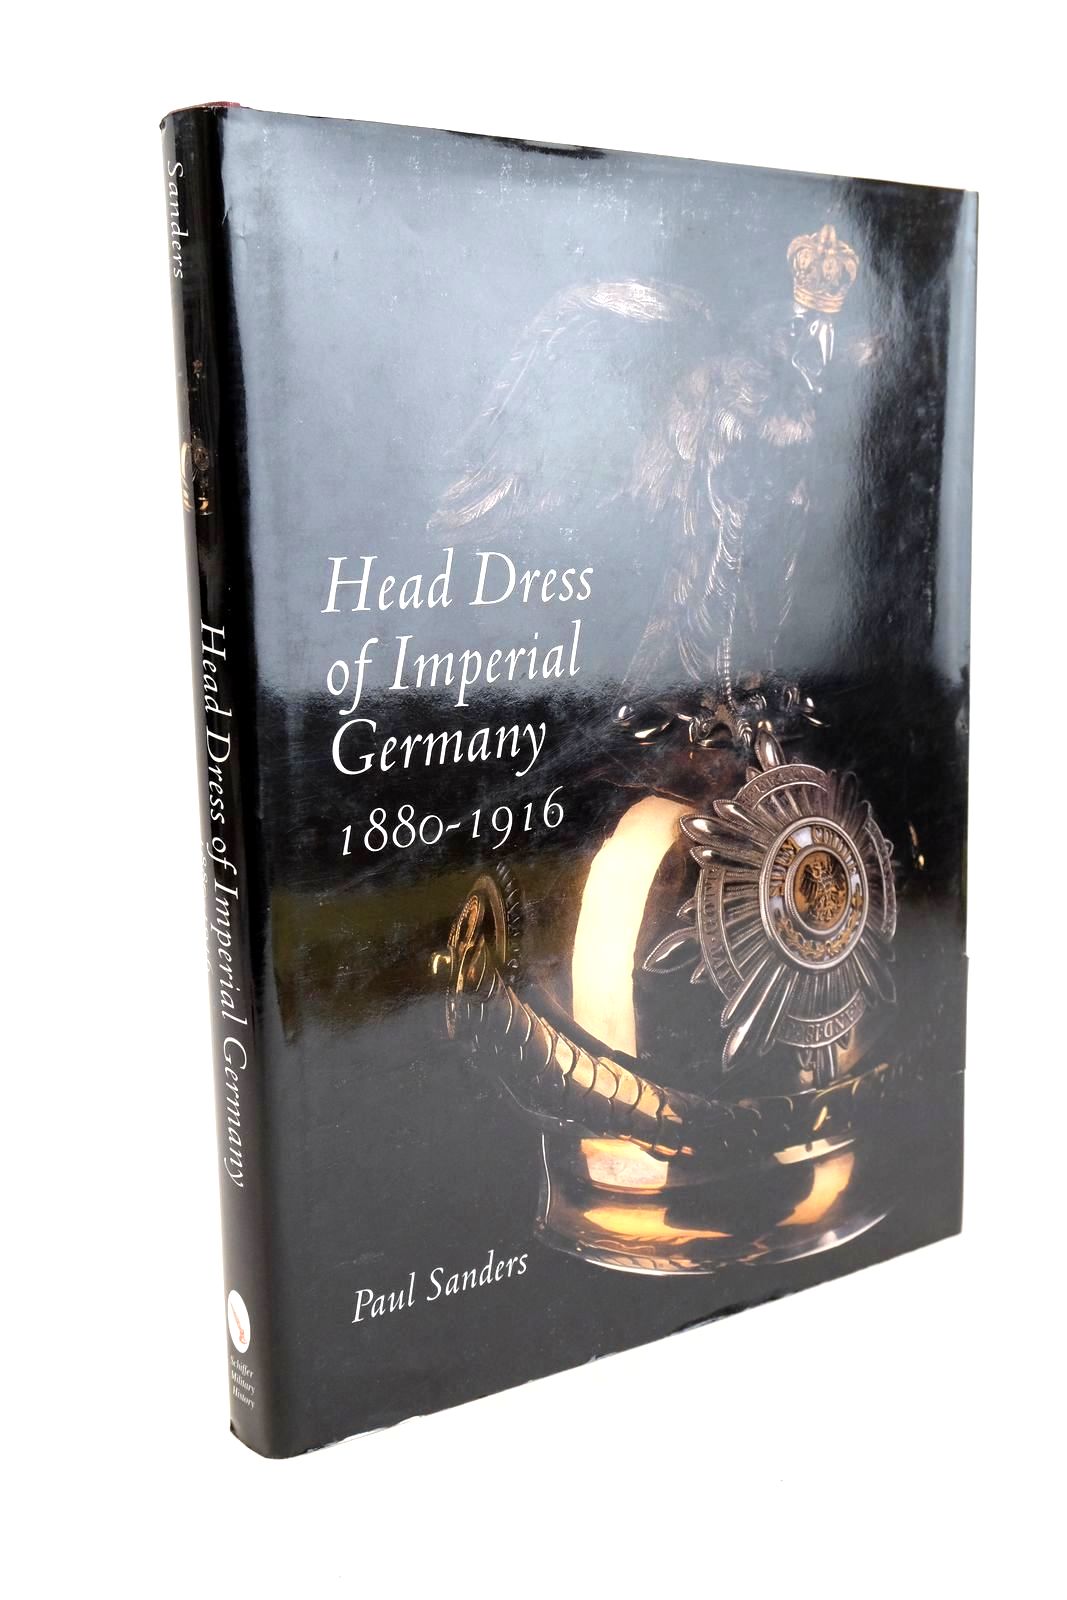 Photo of HEAD DRESS OF IMPERIAL GERMANY 1880-1916 written by Sanders, Paul published by Schiffer Publishing Ltd. (STOCK CODE: 1327279)  for sale by Stella & Rose's Books